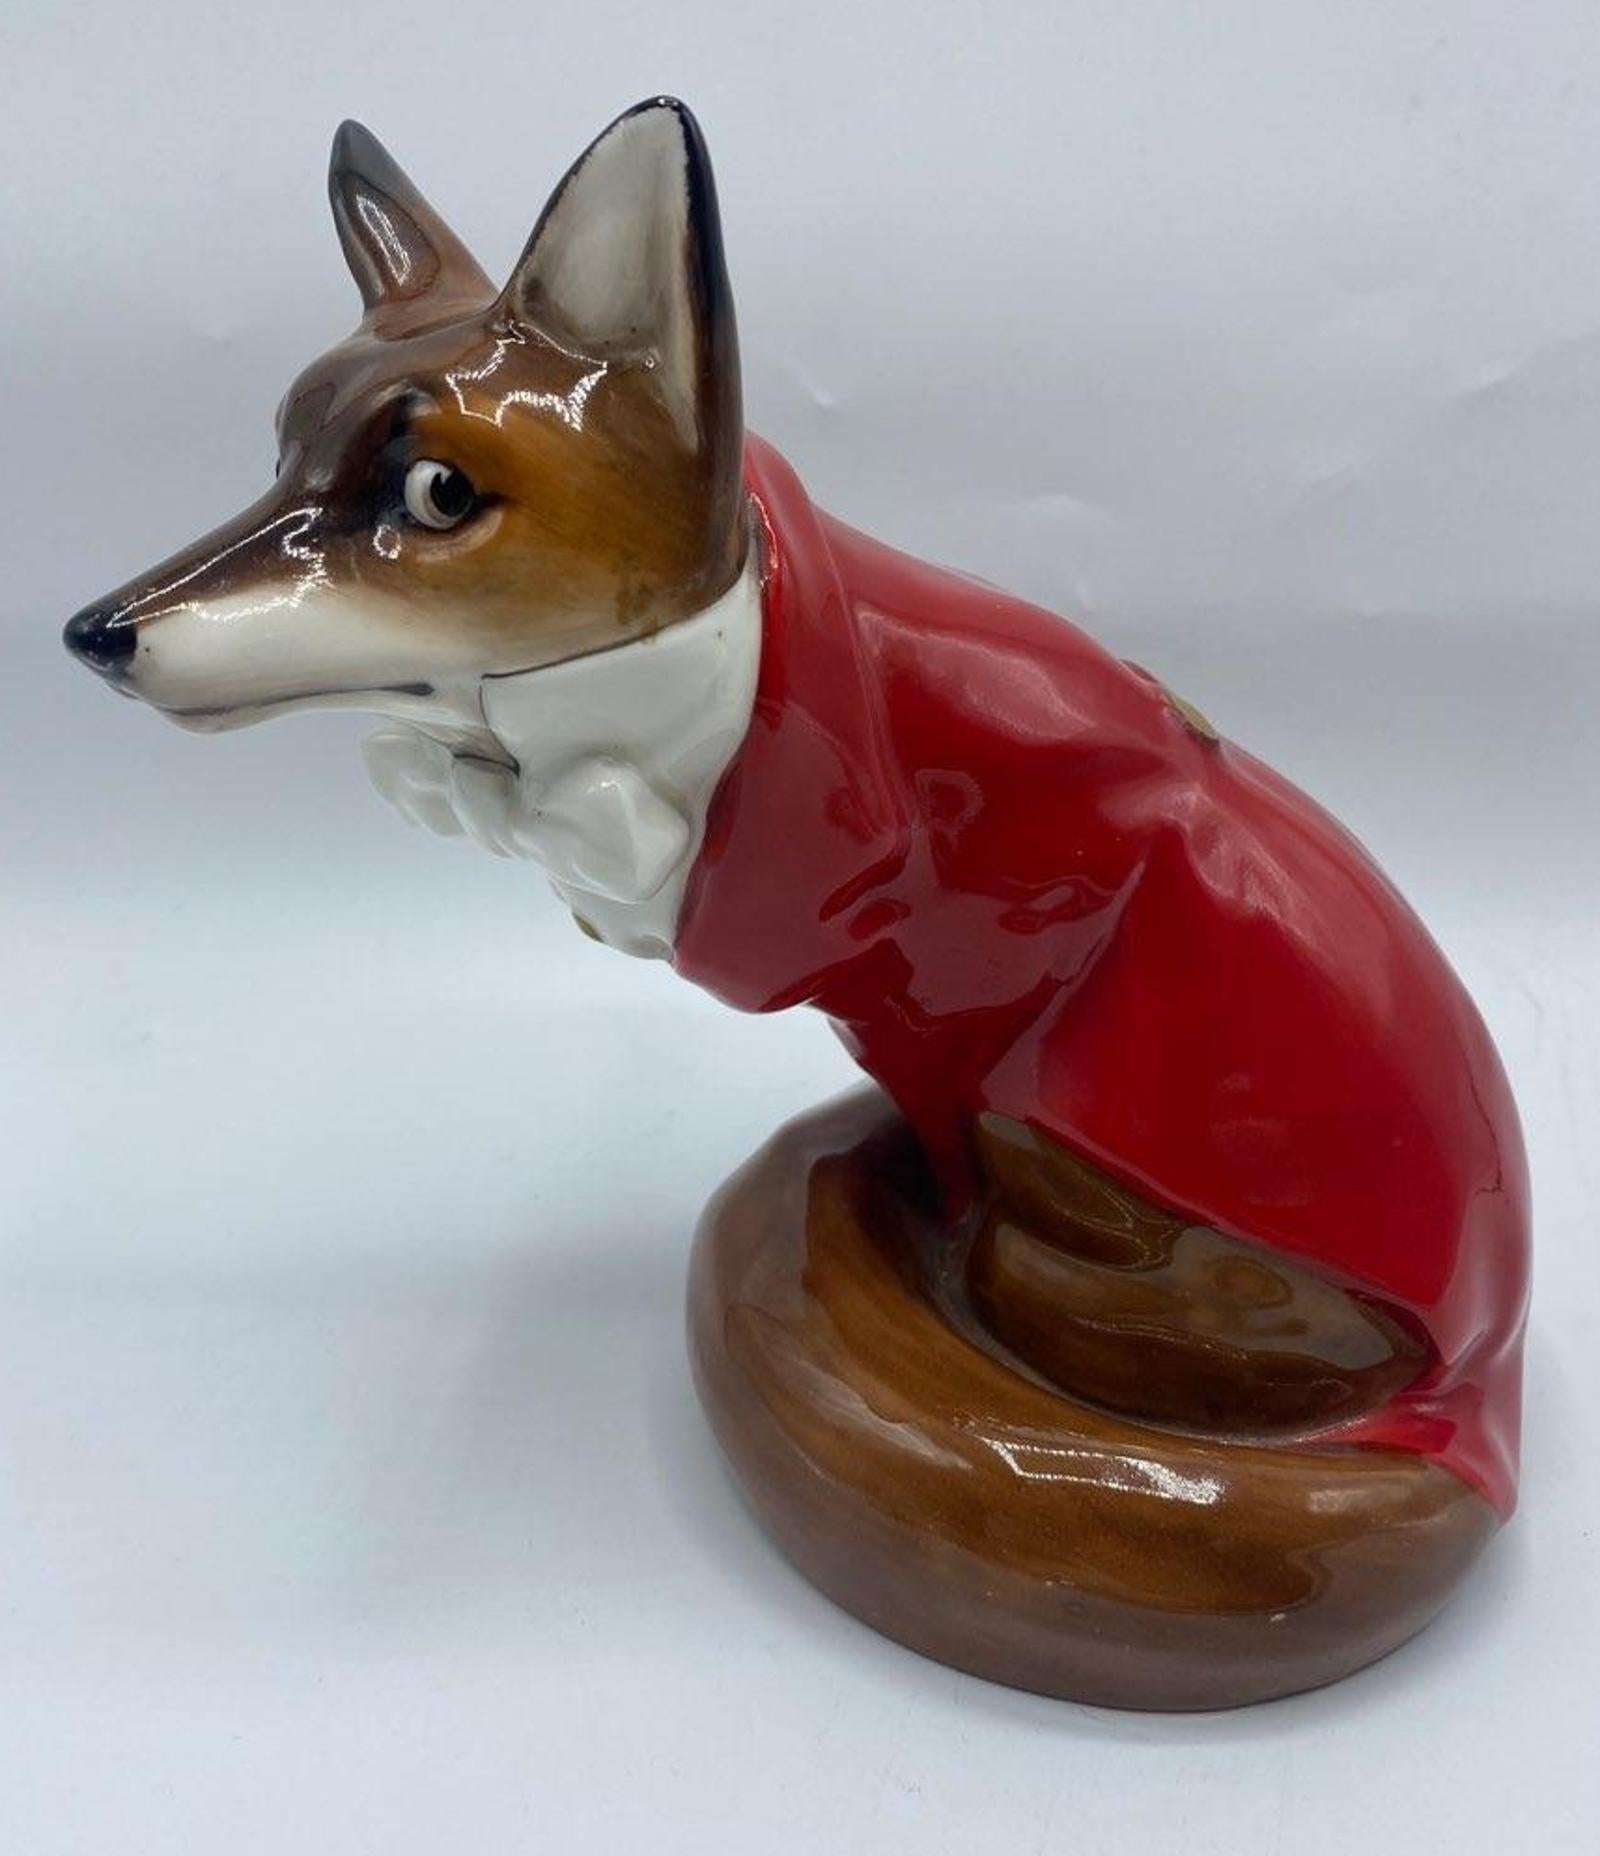 20th century Royal Daulton Fox in red hunting coat bone china figurine
Modeled seating in hunting dress - hunting coat, white shirt and bow tie
Printed mark - 